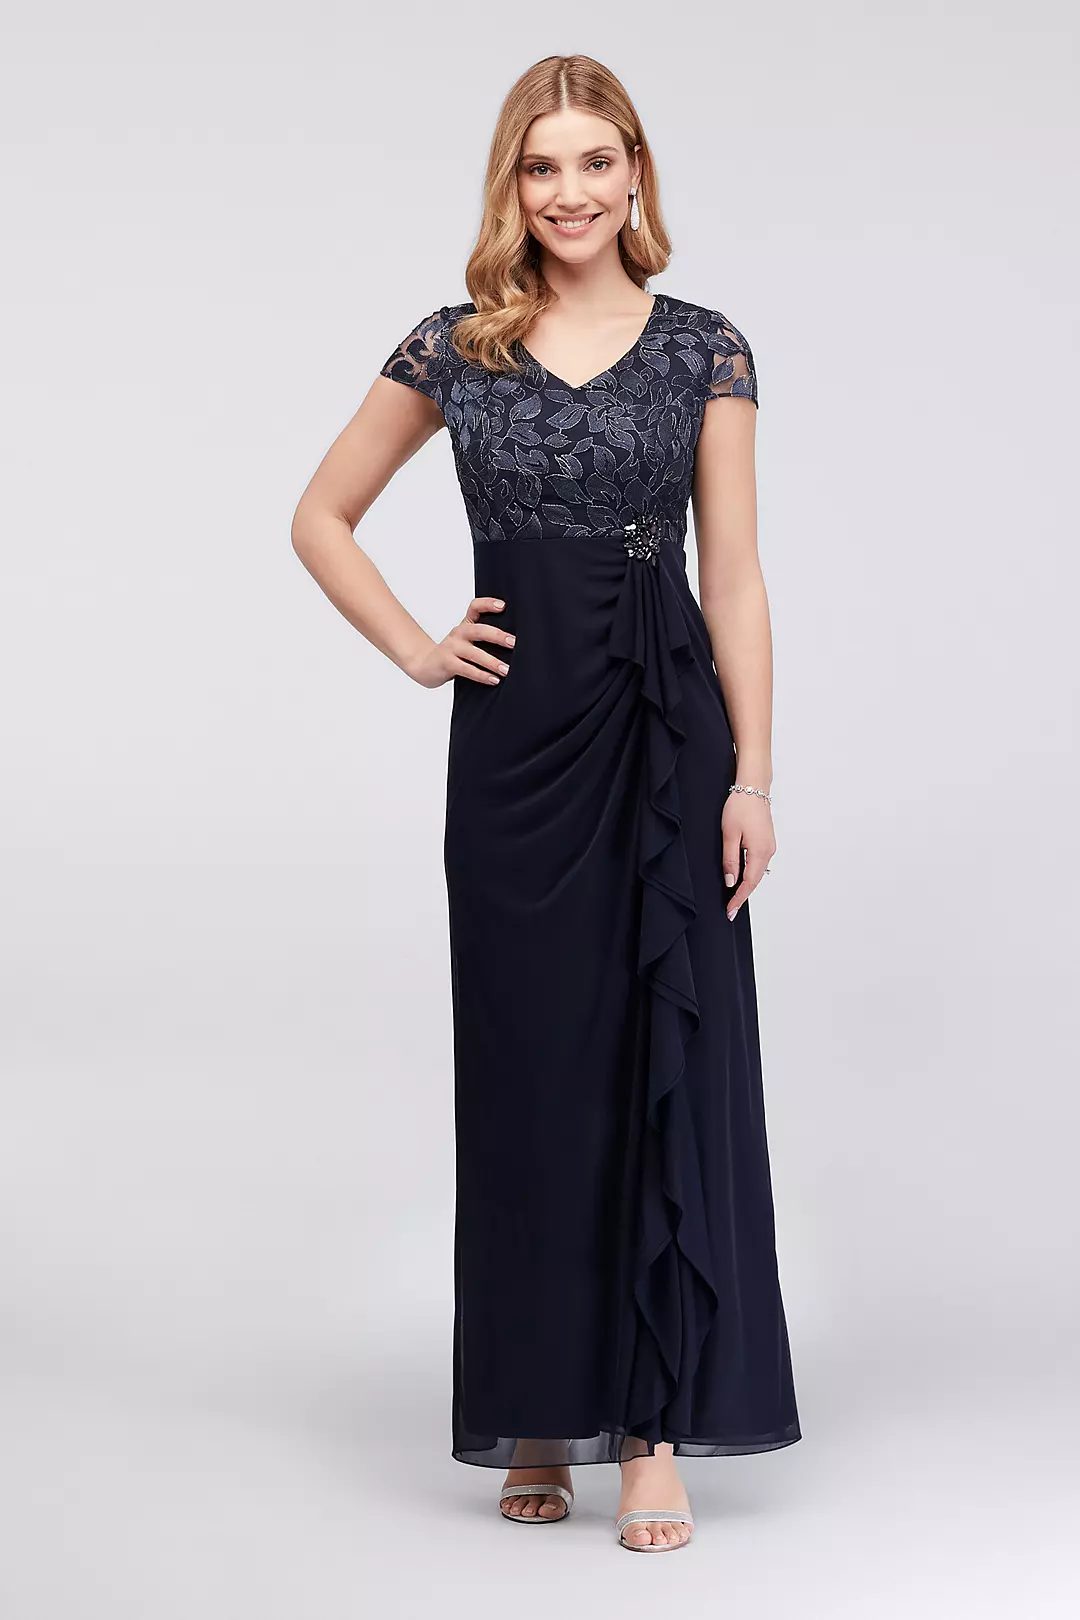 Embroidered Petite Sheath with Cascade Skirt Image